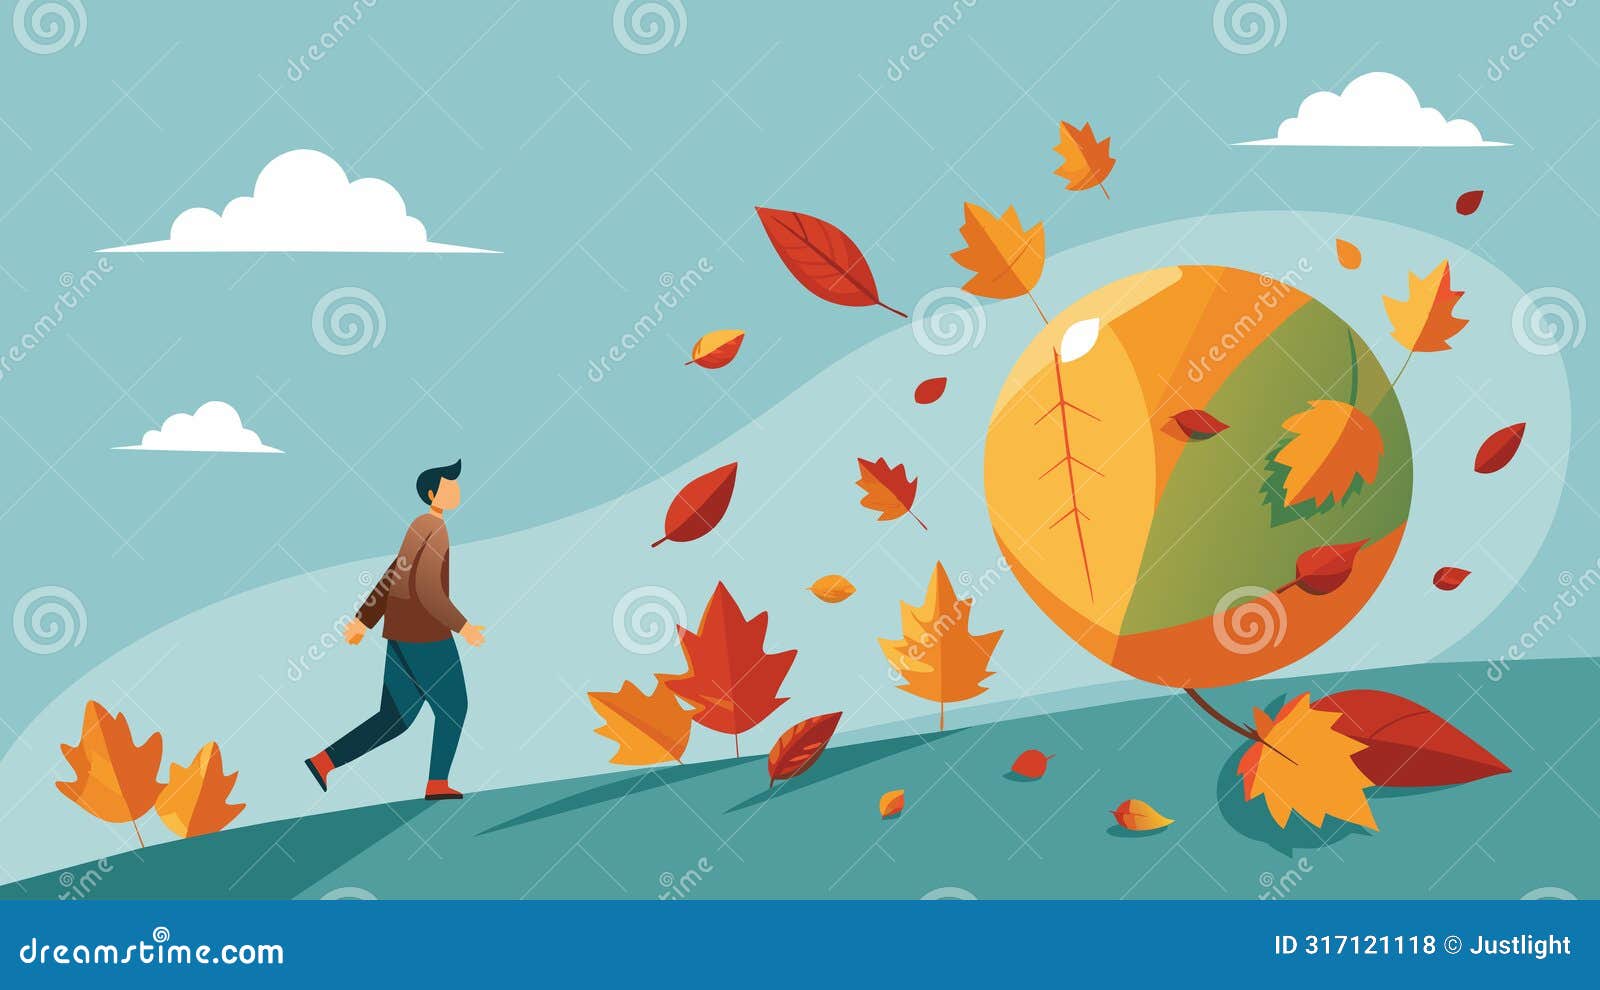 as autumn leaves fall and the world around undergoes transformation the stoic path is walked by those who embrace change